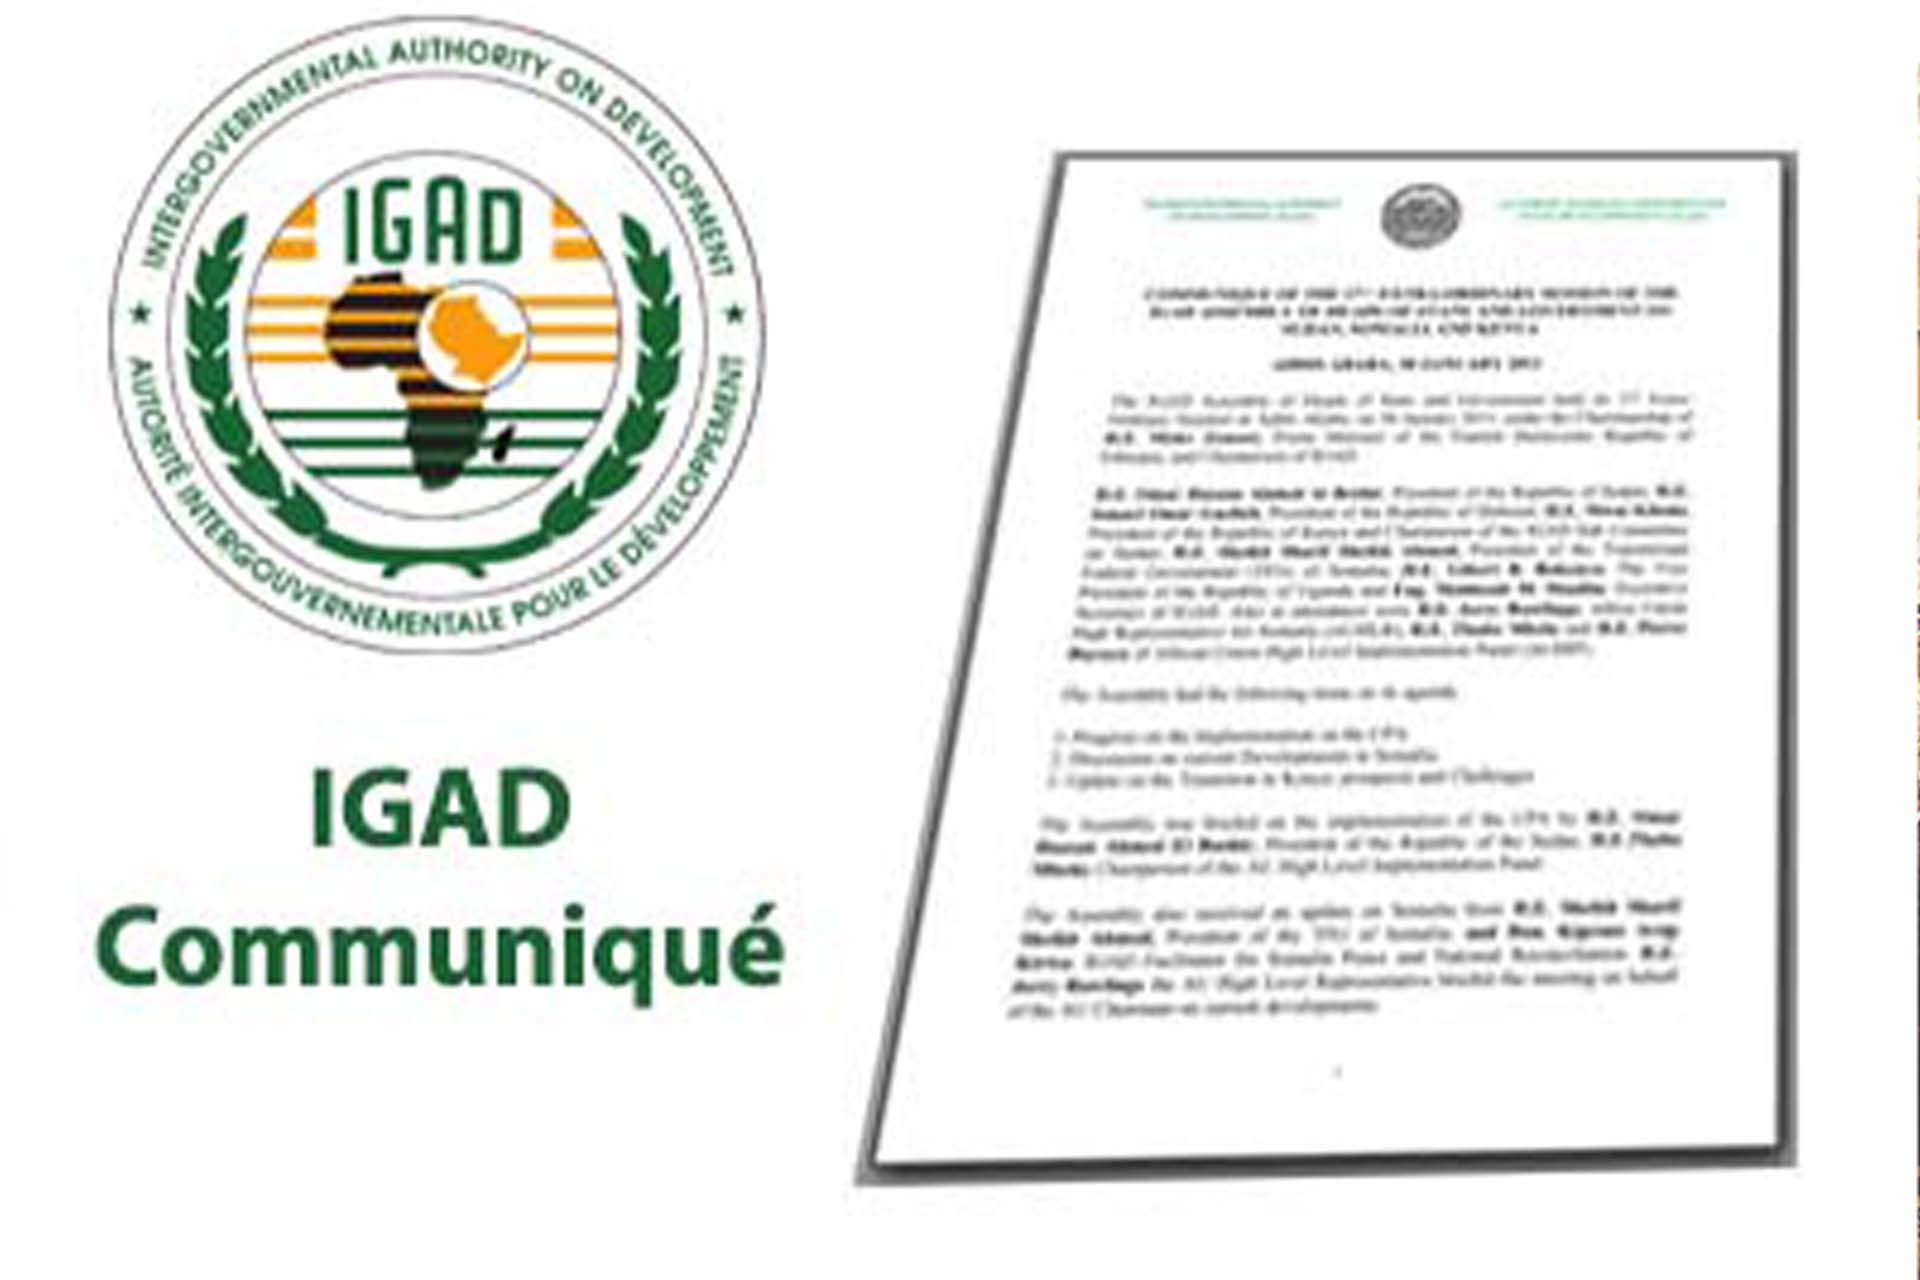 Communique of the Foreign Ministers of Inter-Governmental Authority on Development (IGAD)